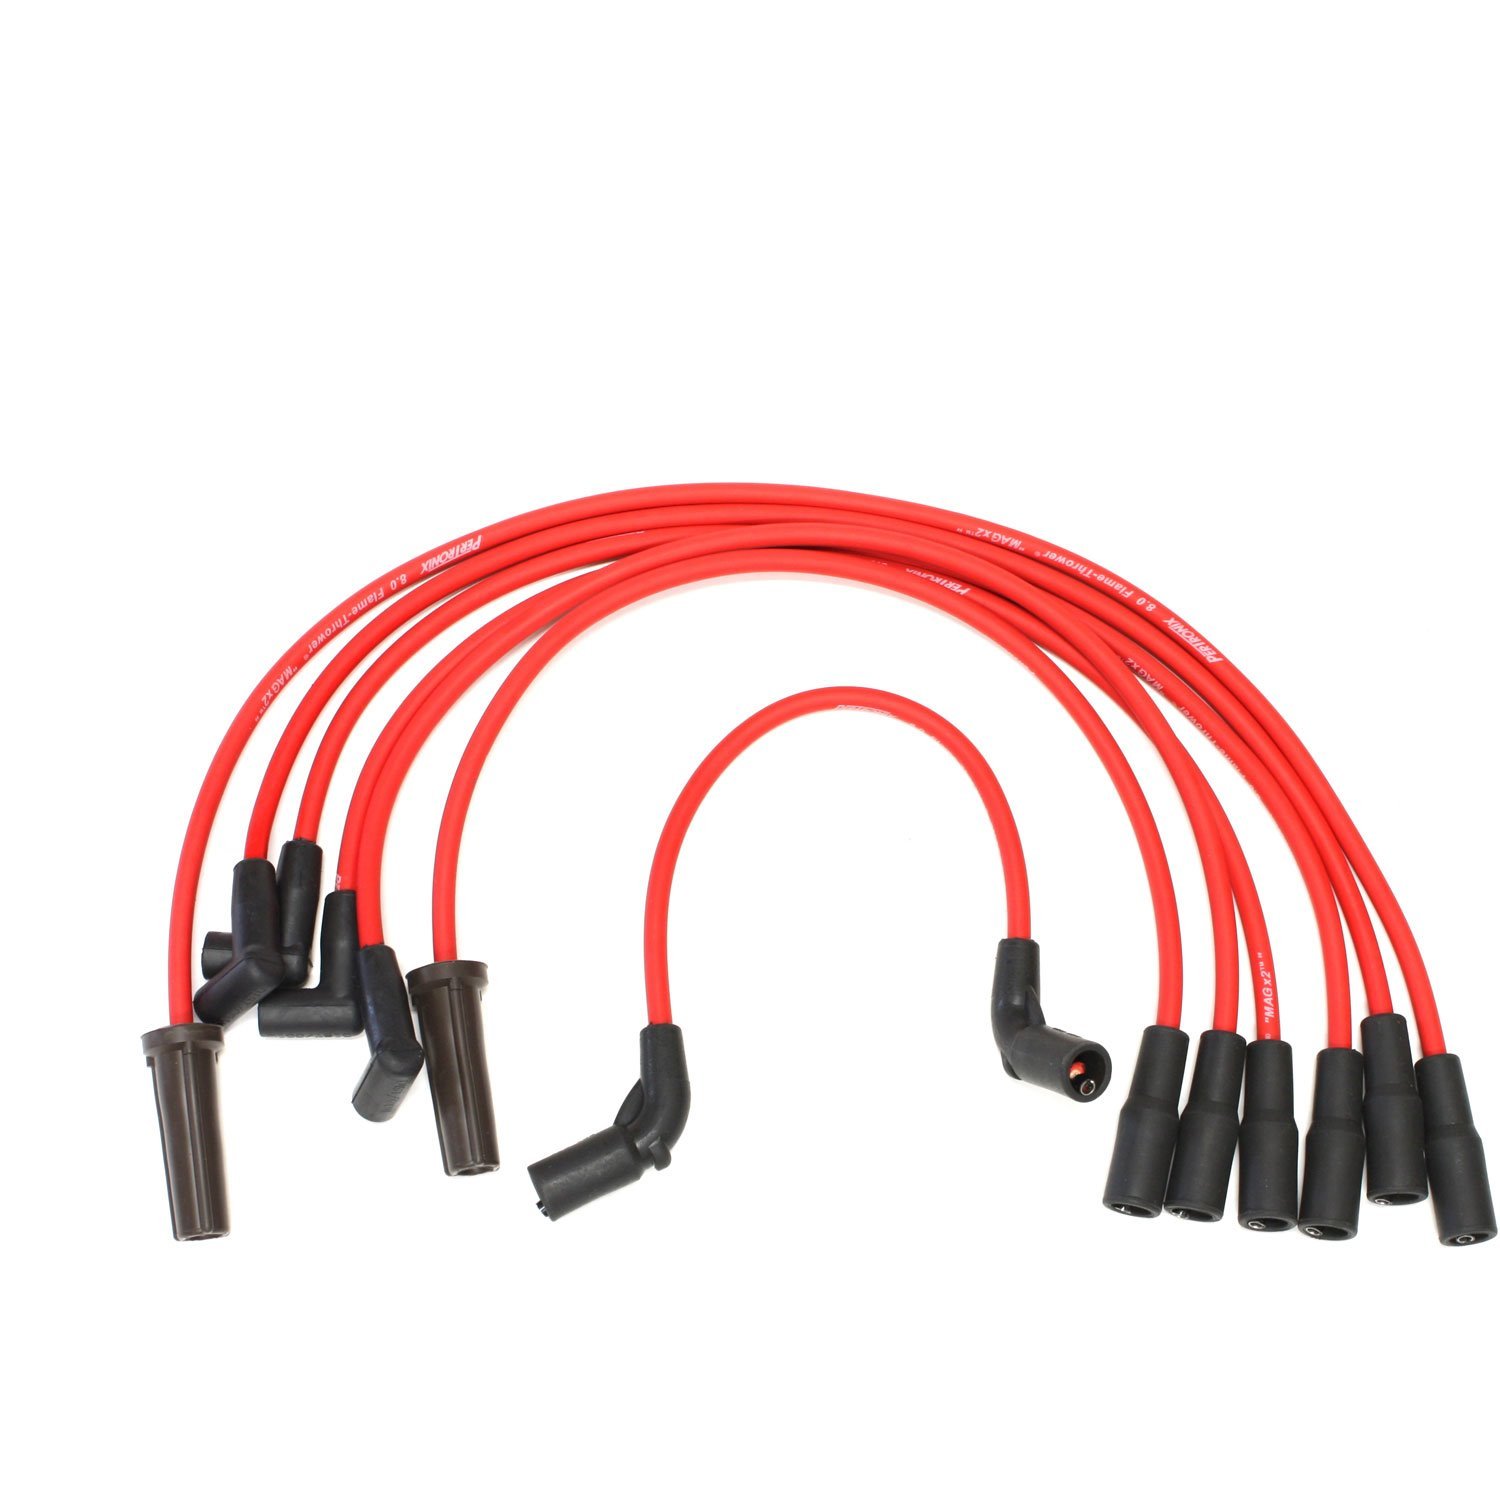 PerTronix 806426 Flame-Thrower Spark Plug Wires 6 cyl GM Custom Fit Red